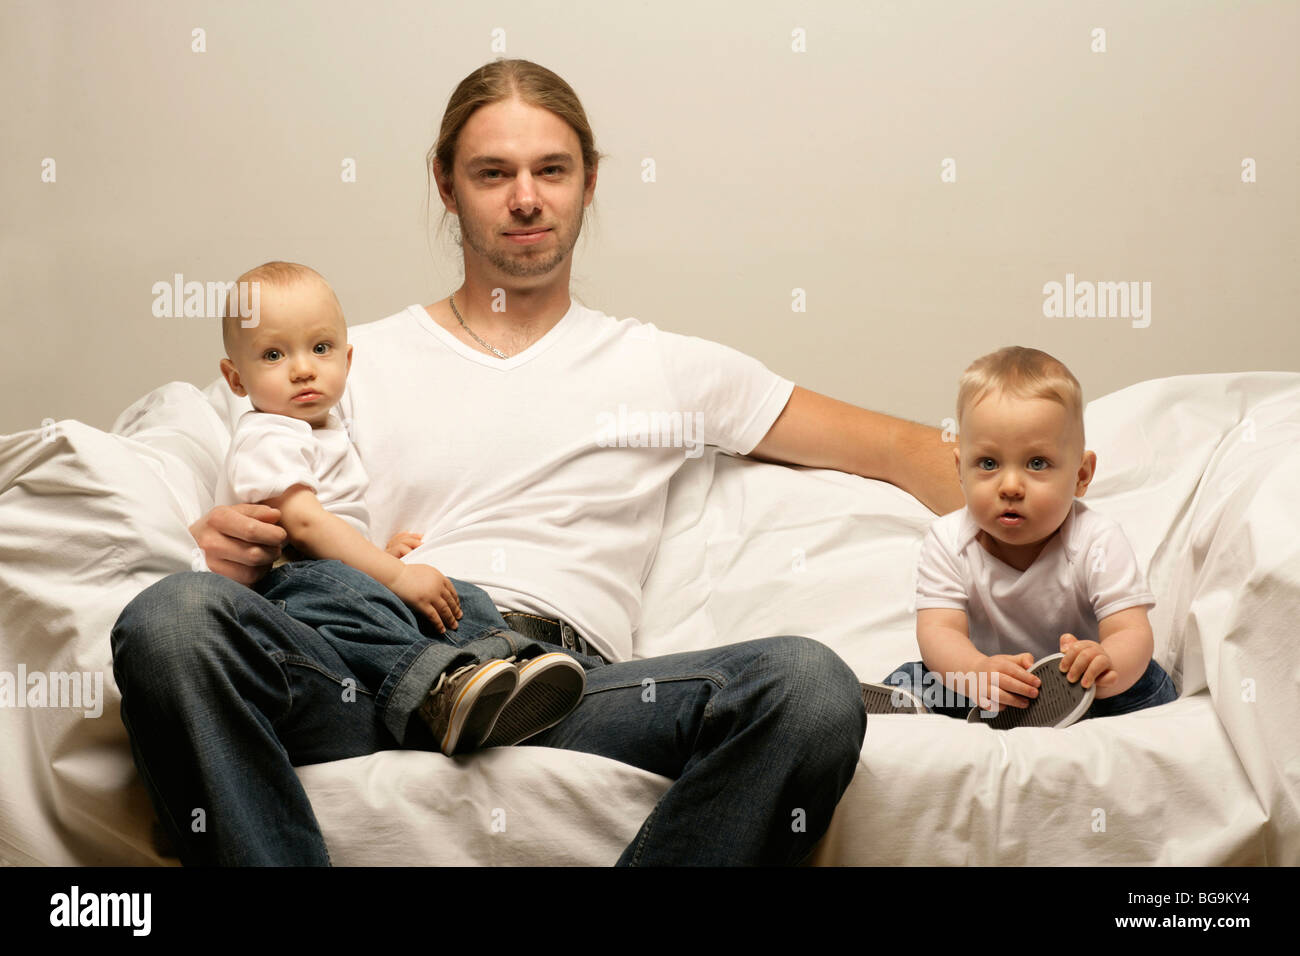 Laughing father sitting on a couch with boy twins Stock Photo